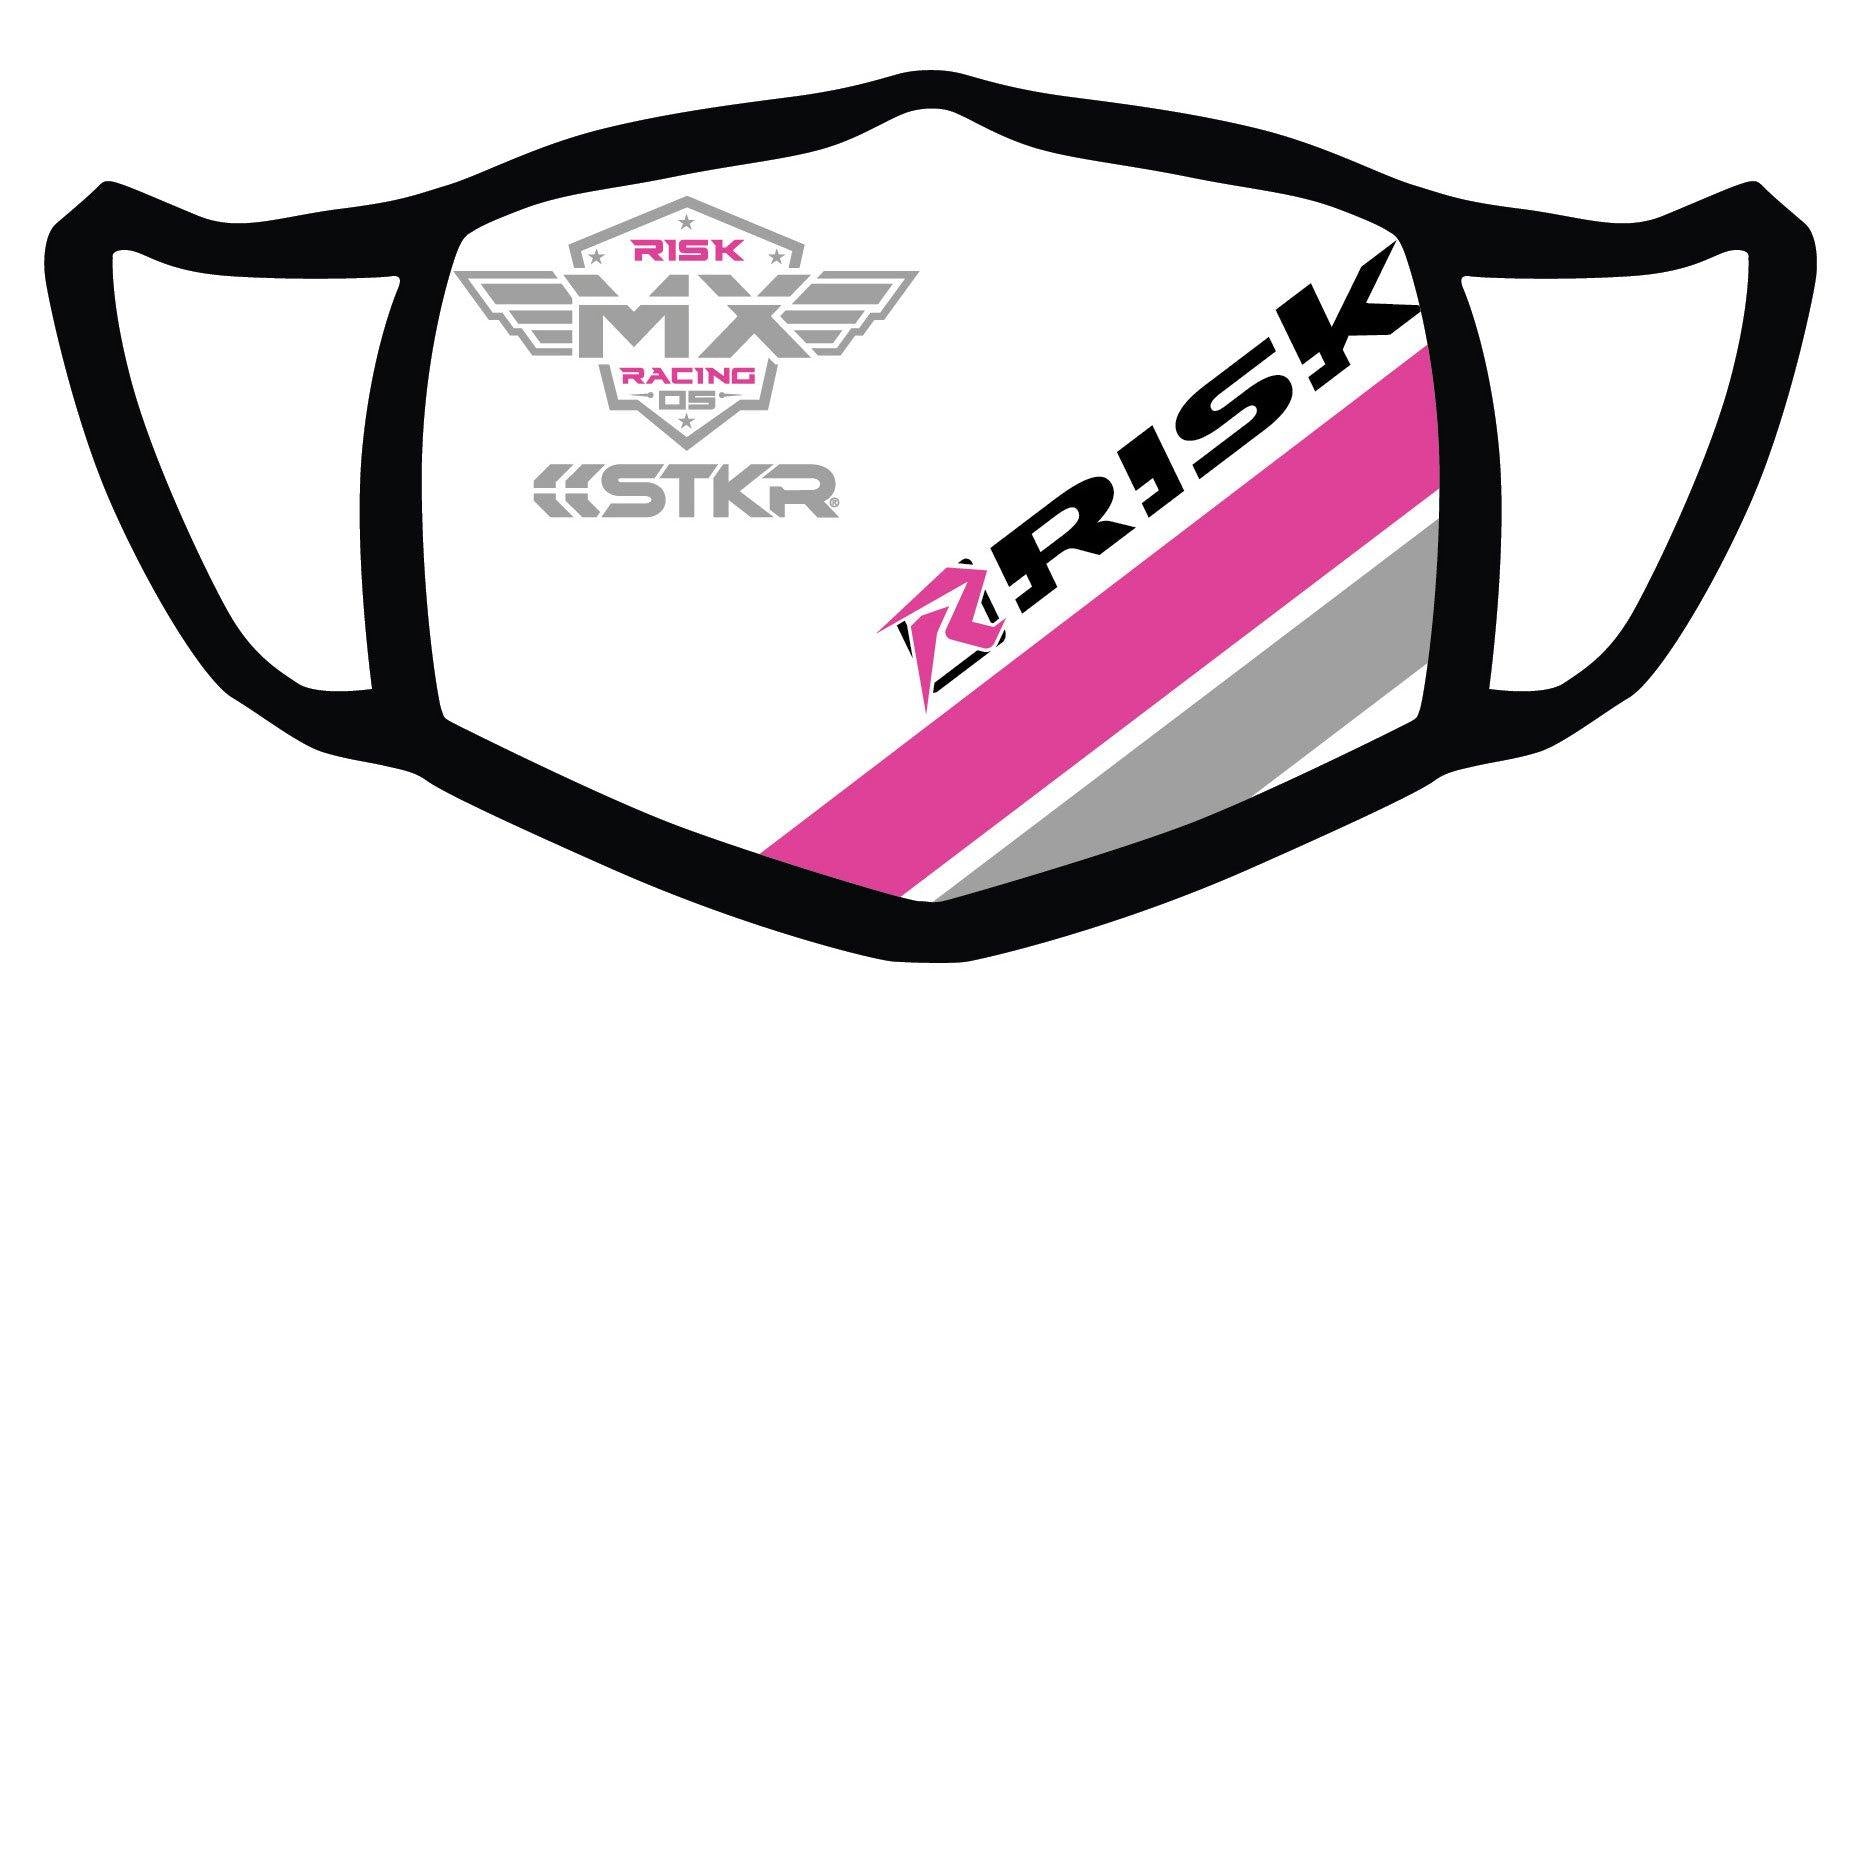 Face Mask - Prevent COVID-19 spread with Risk Team Pink Cloth Face Mask Covering by Risk Racing